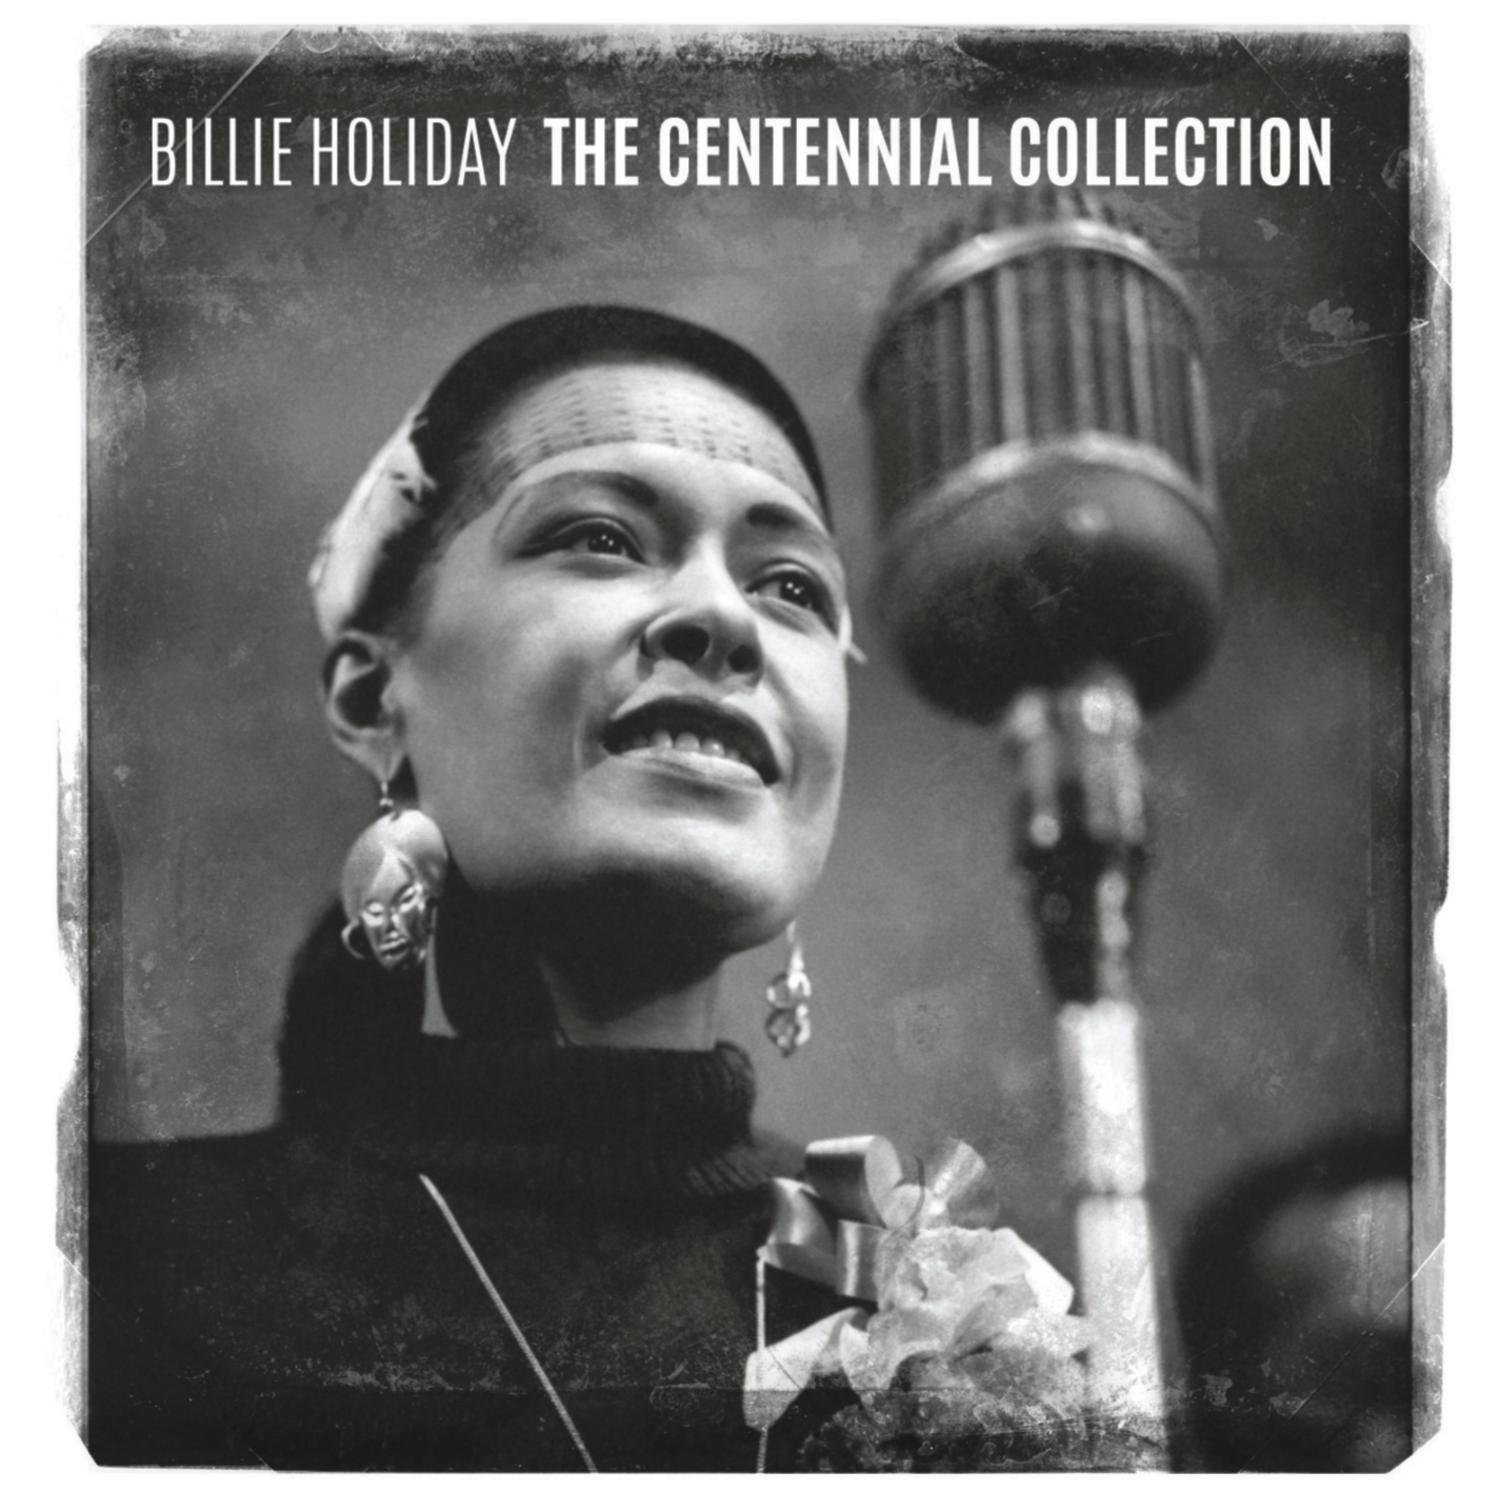 Billie Holiday - Billie Holiday (The Centennial Collection) (Music CD)